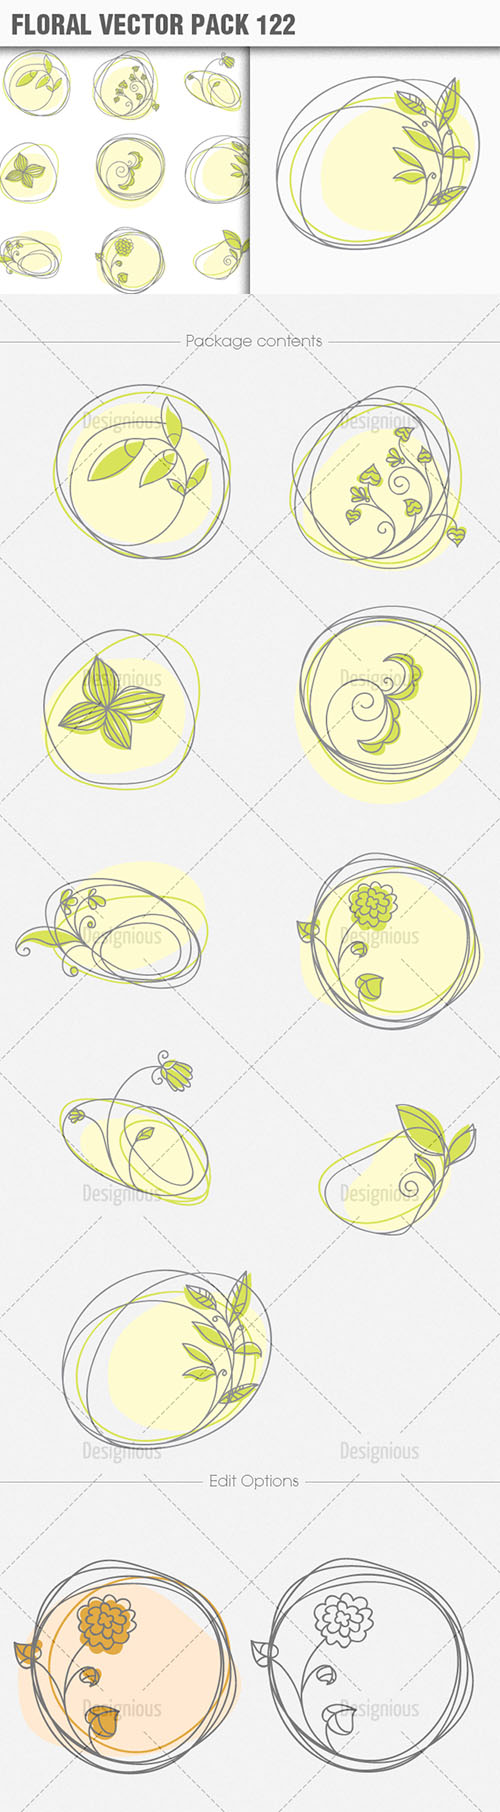 Floral Vector Pack 122